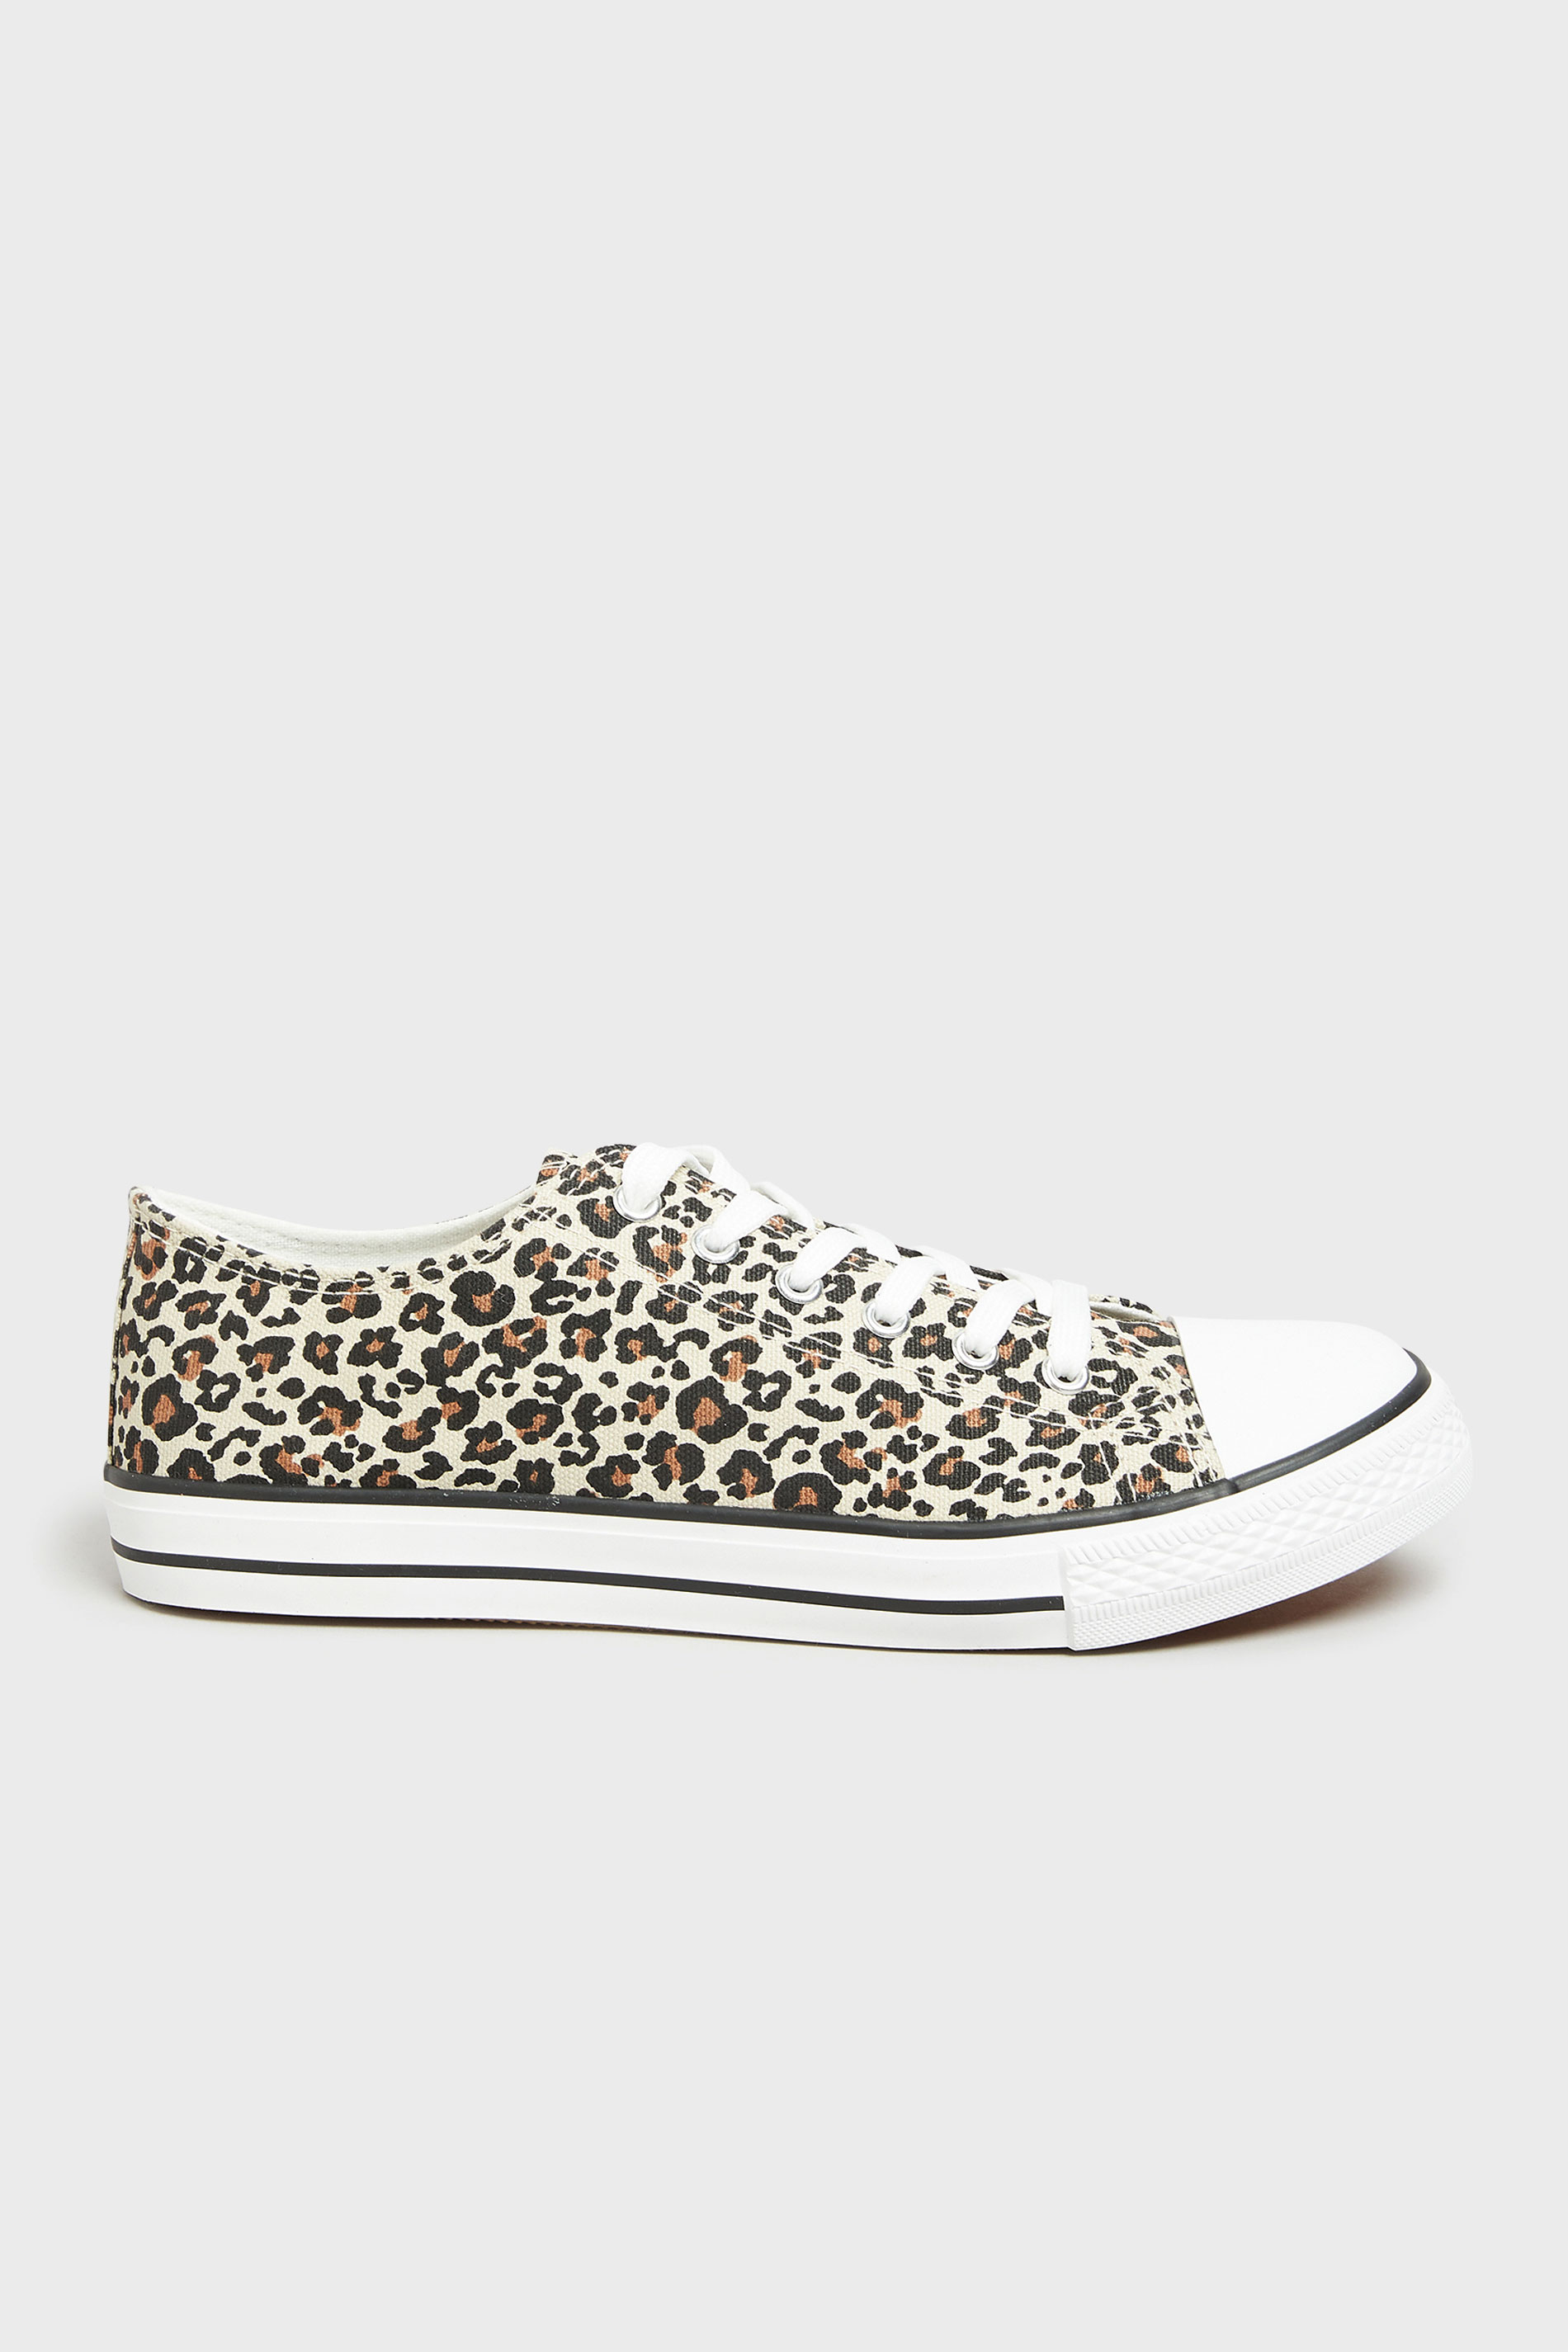 Grande taille  Trainers Grande taille  Lace Ups | LTS Brown Leopard Print Canvas Low Trainers In Standard D Fit - ZY31831